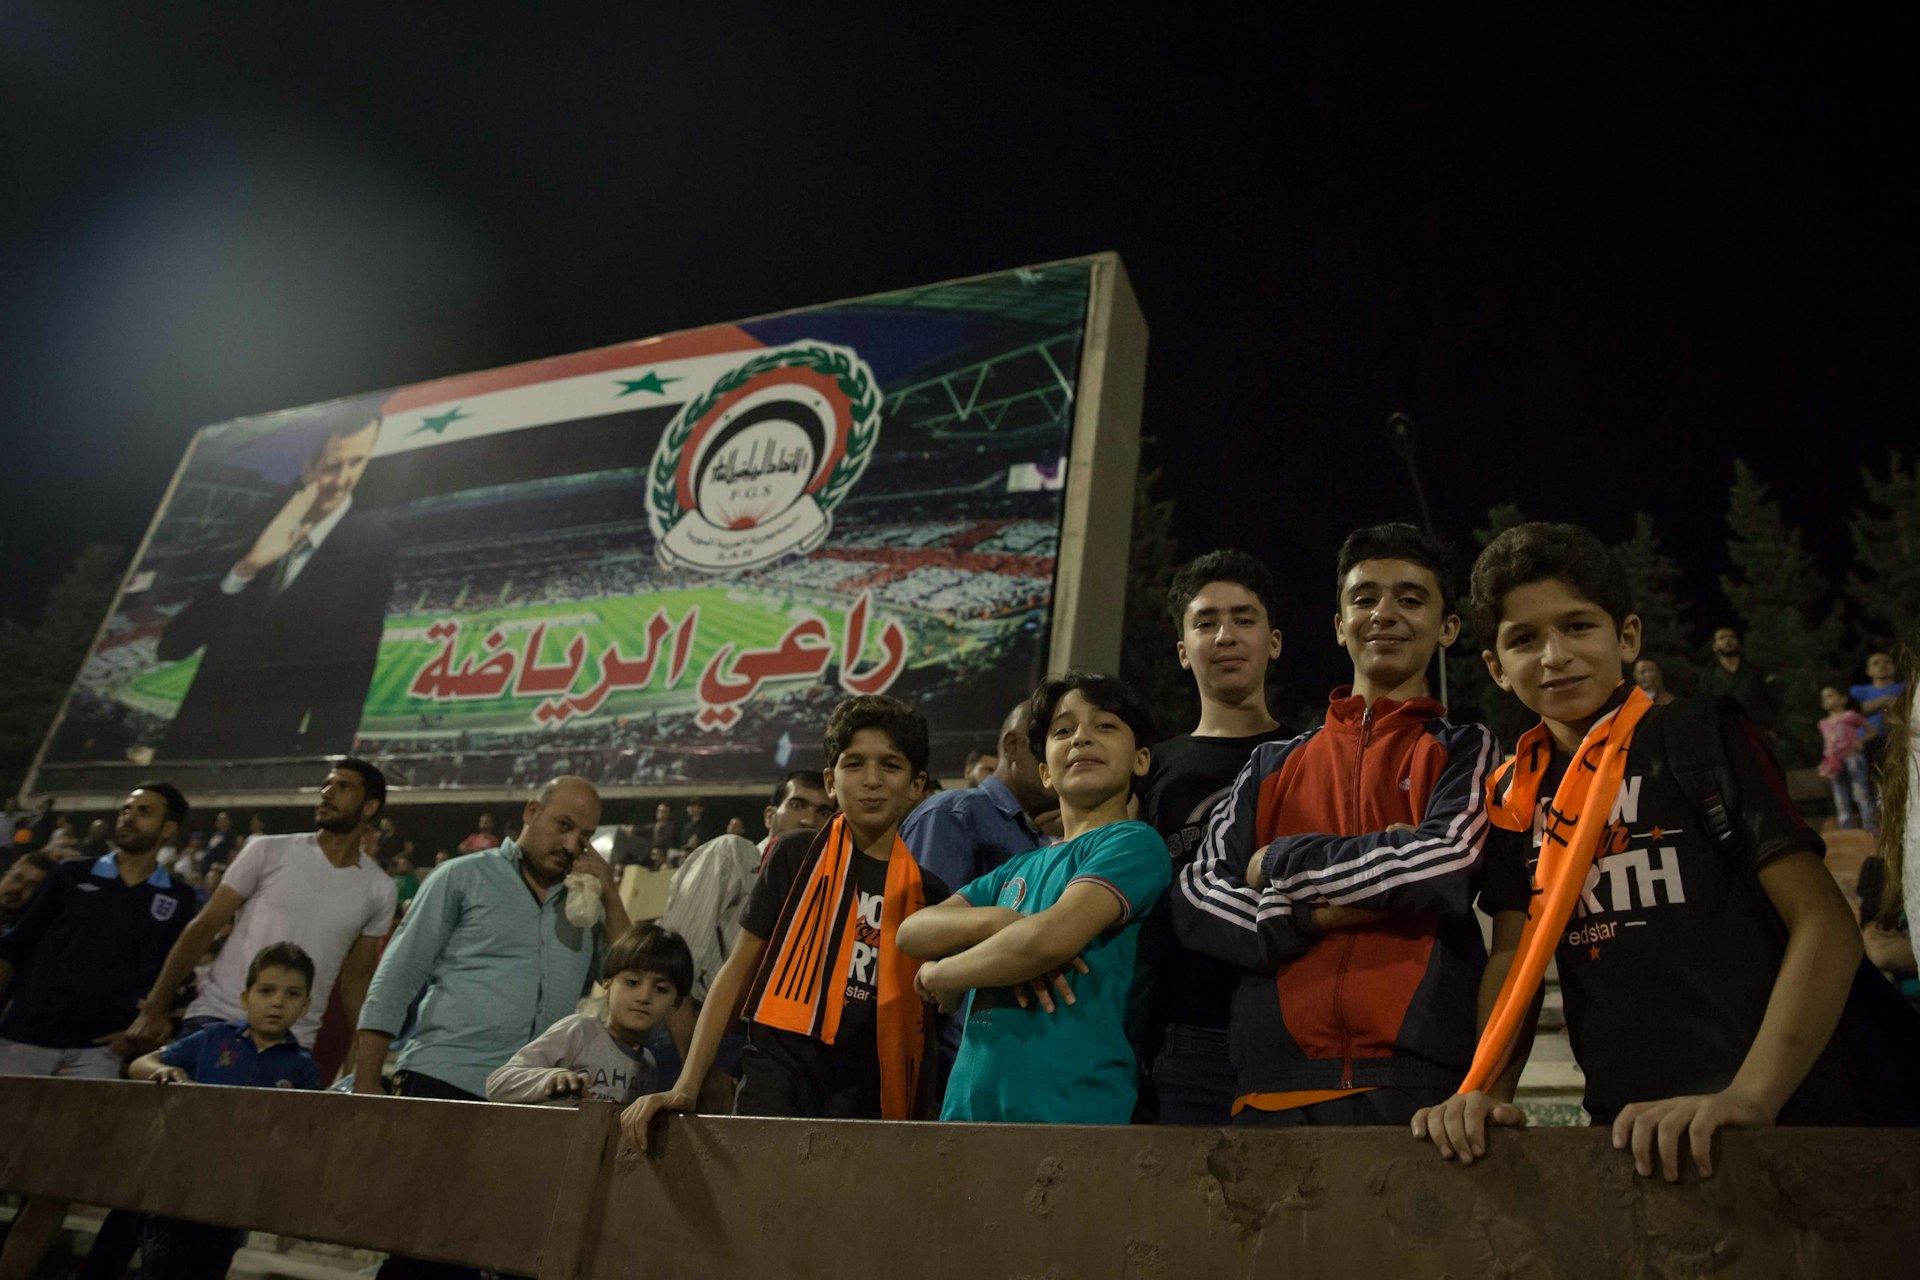 Shooting the sidelines at Syria’s football cup final